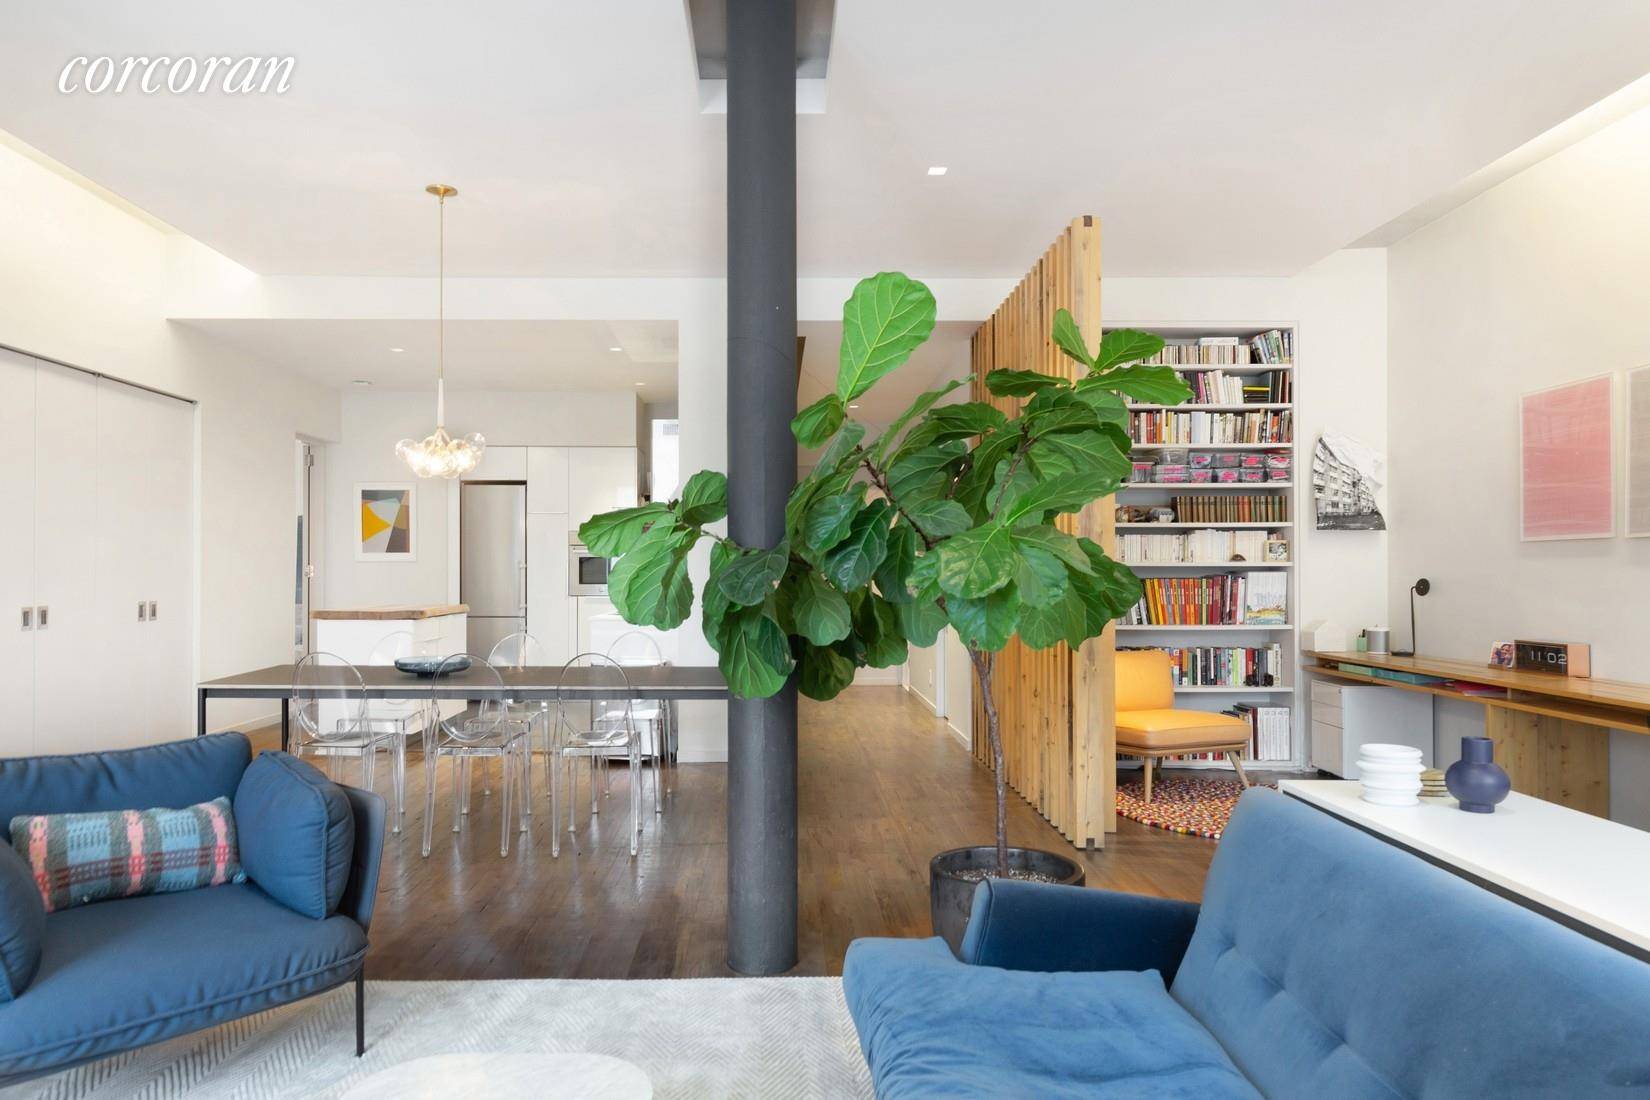 One of a kind, award winning designer loft brought to market for the first time at the Landmarked Eagle Warehouse, at 28 Old Fulton Street, overlooking Pier 1 of Brooklyn ...